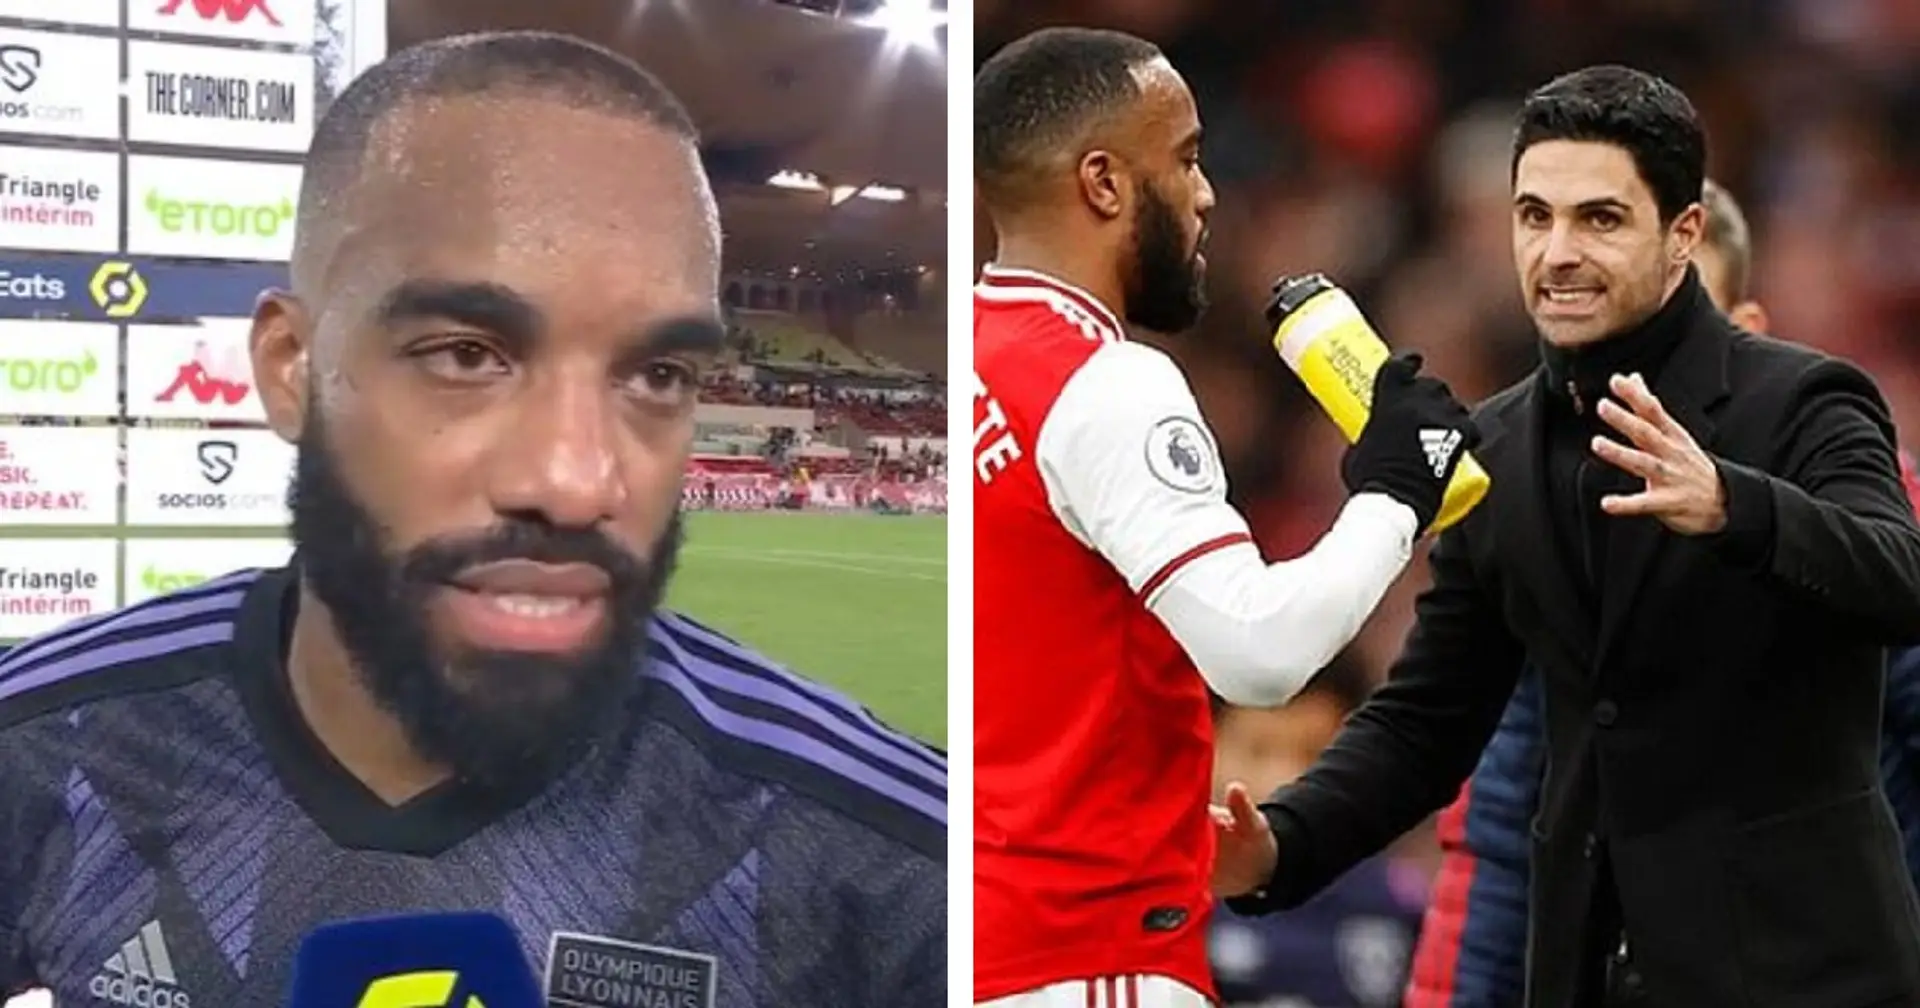 'I know Arteta's way of working': Lacazette not surprised by Arsenal's title charge this season